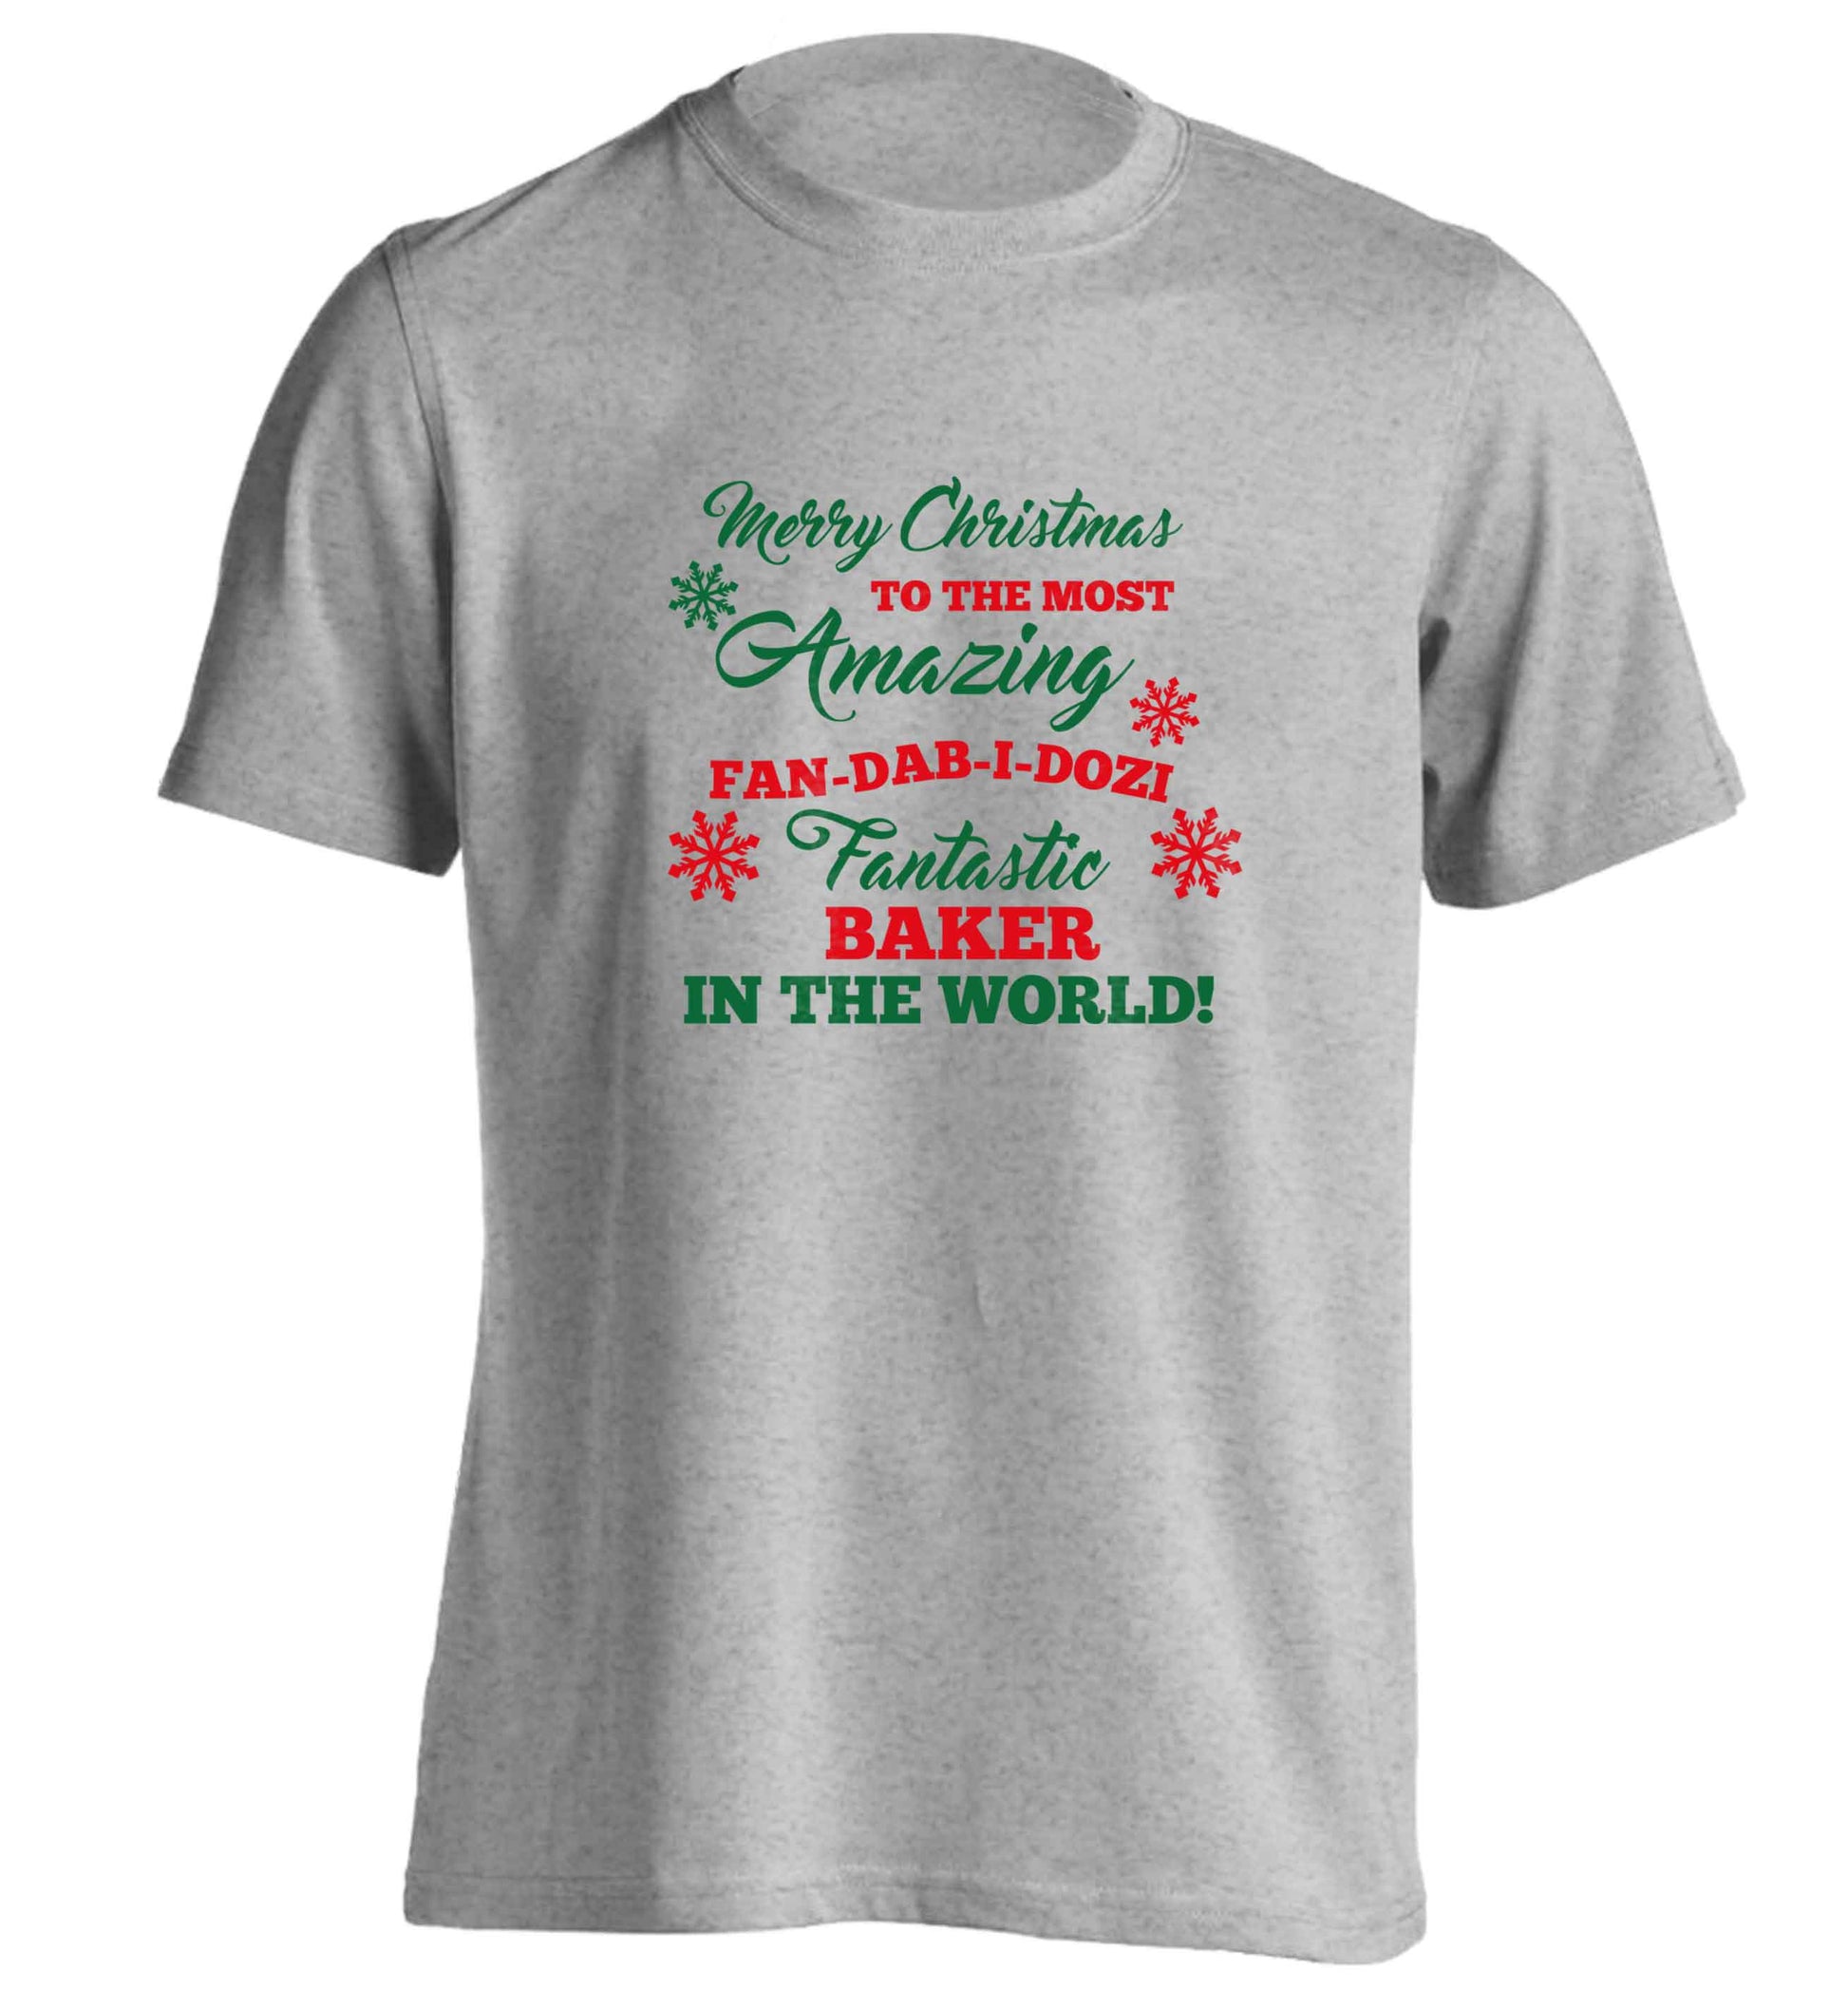 Merry Christmas to the most amazing baker in the world! adults unisex grey Tshirt 2XL